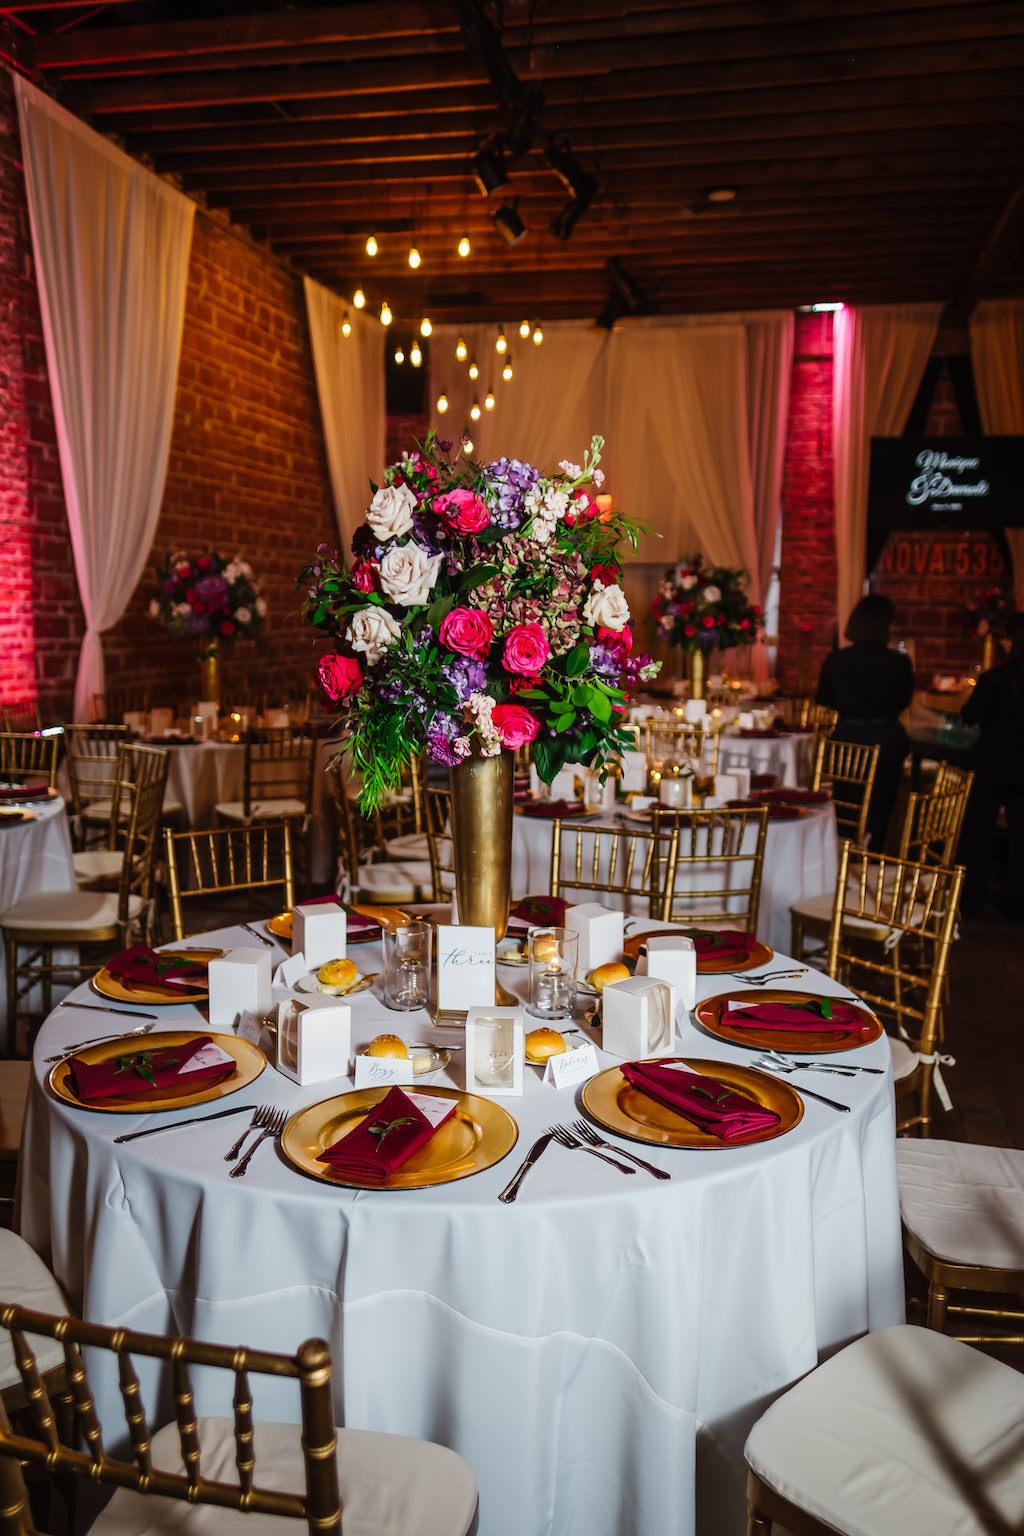 Romantic, Garden Modern Wedding Decor and Reception, Tall Gold Centerpieces with Lush Floral and Greenery, Blush Pink Roses, Burgundy Flowers, Plum Hibiscuses, Quartz and Magenta Blooms, Chiavari Chairs and Chargers, Round Tables with White Linen and Draping, Exposed Red Brick Wall with Vintage Hanging Indoor Lighting | Unique Florida Industrial Wedding Venue NOVA 535 in Downtown St. Pete